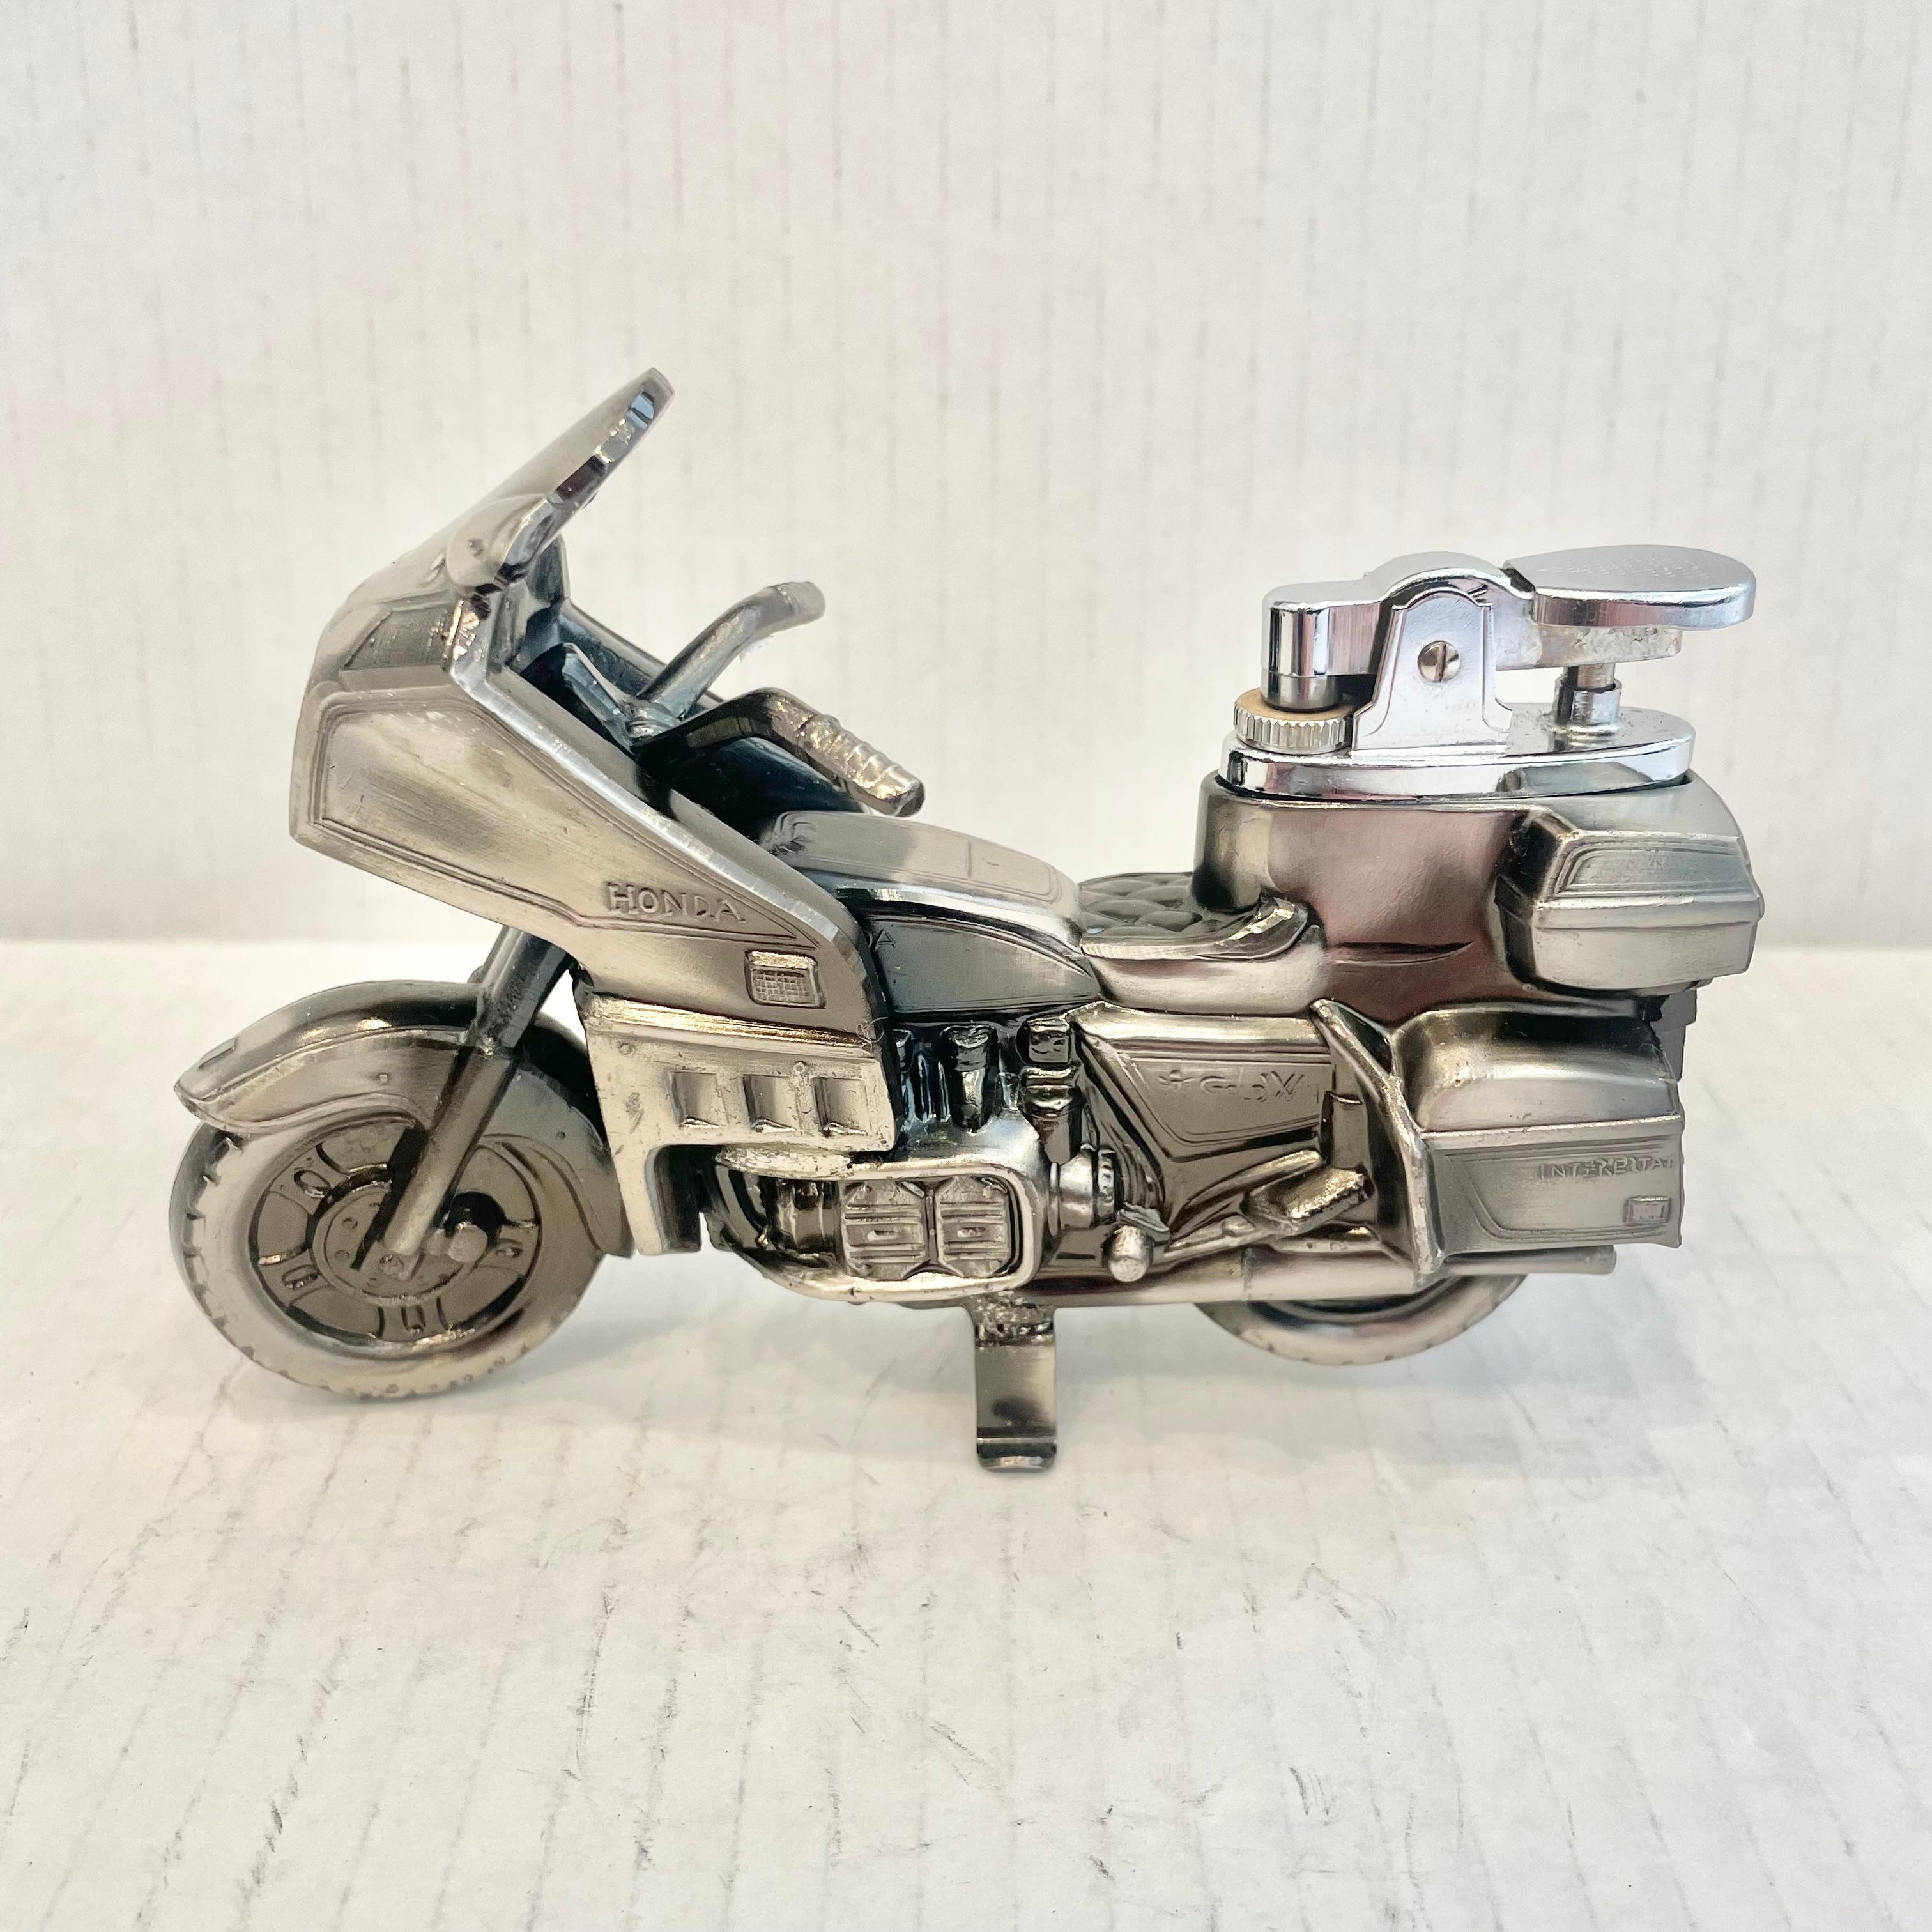 Cool vintage table lighter in the shape of a Honda Gold Wing motorcycle. Made completely of metal with a hollow body. Beautiful burnished silver color with intricate details. Cool tobacco accessory and conversation piece. Working lighter. Very